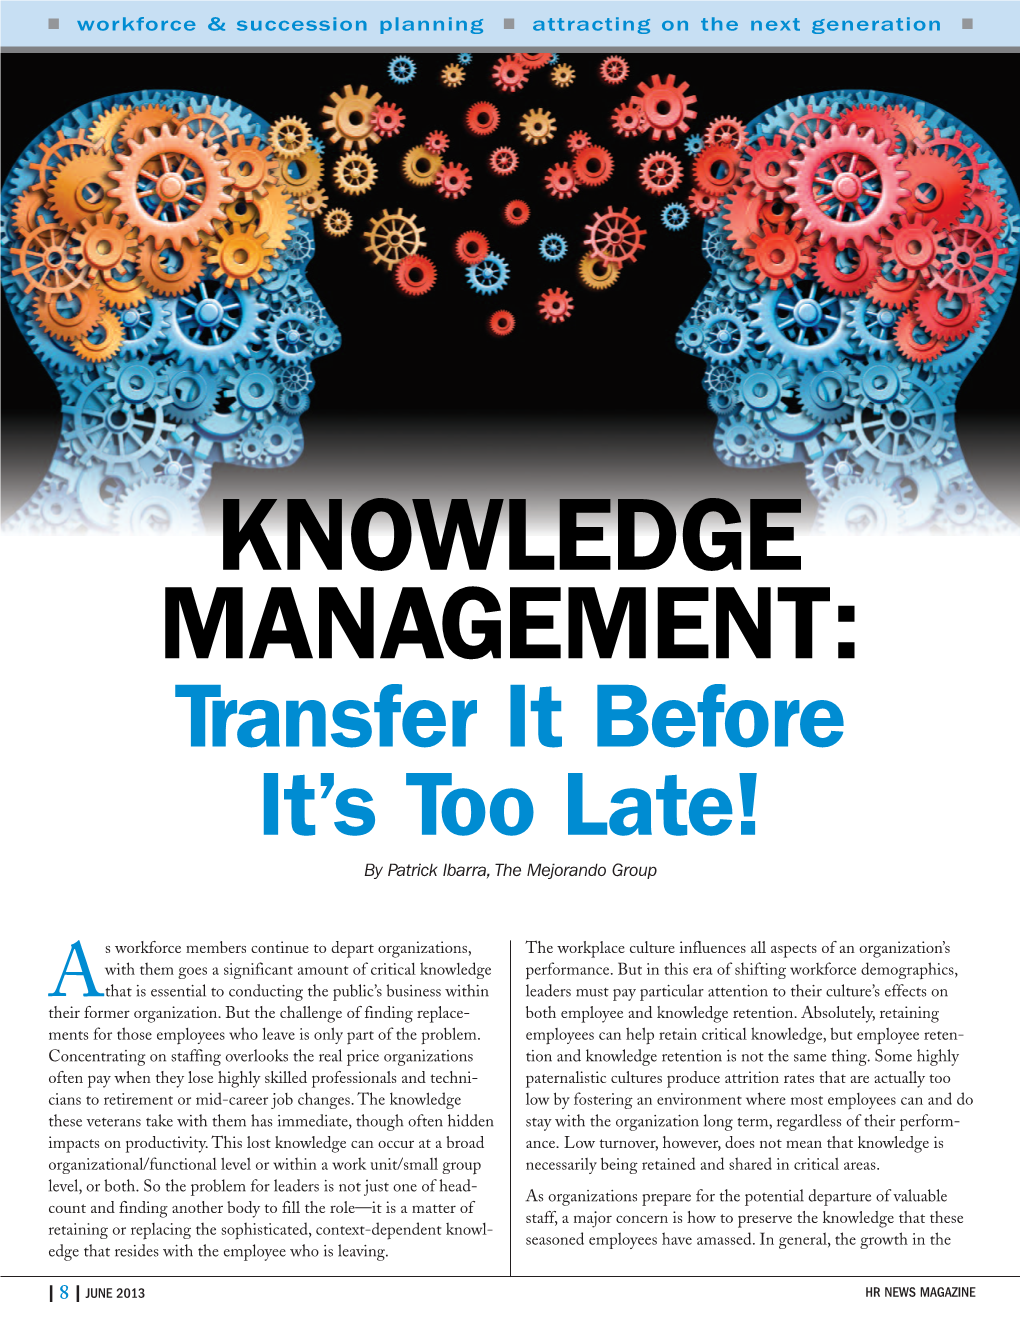 Knowledge Management: Transfer It Before It's Too Late!